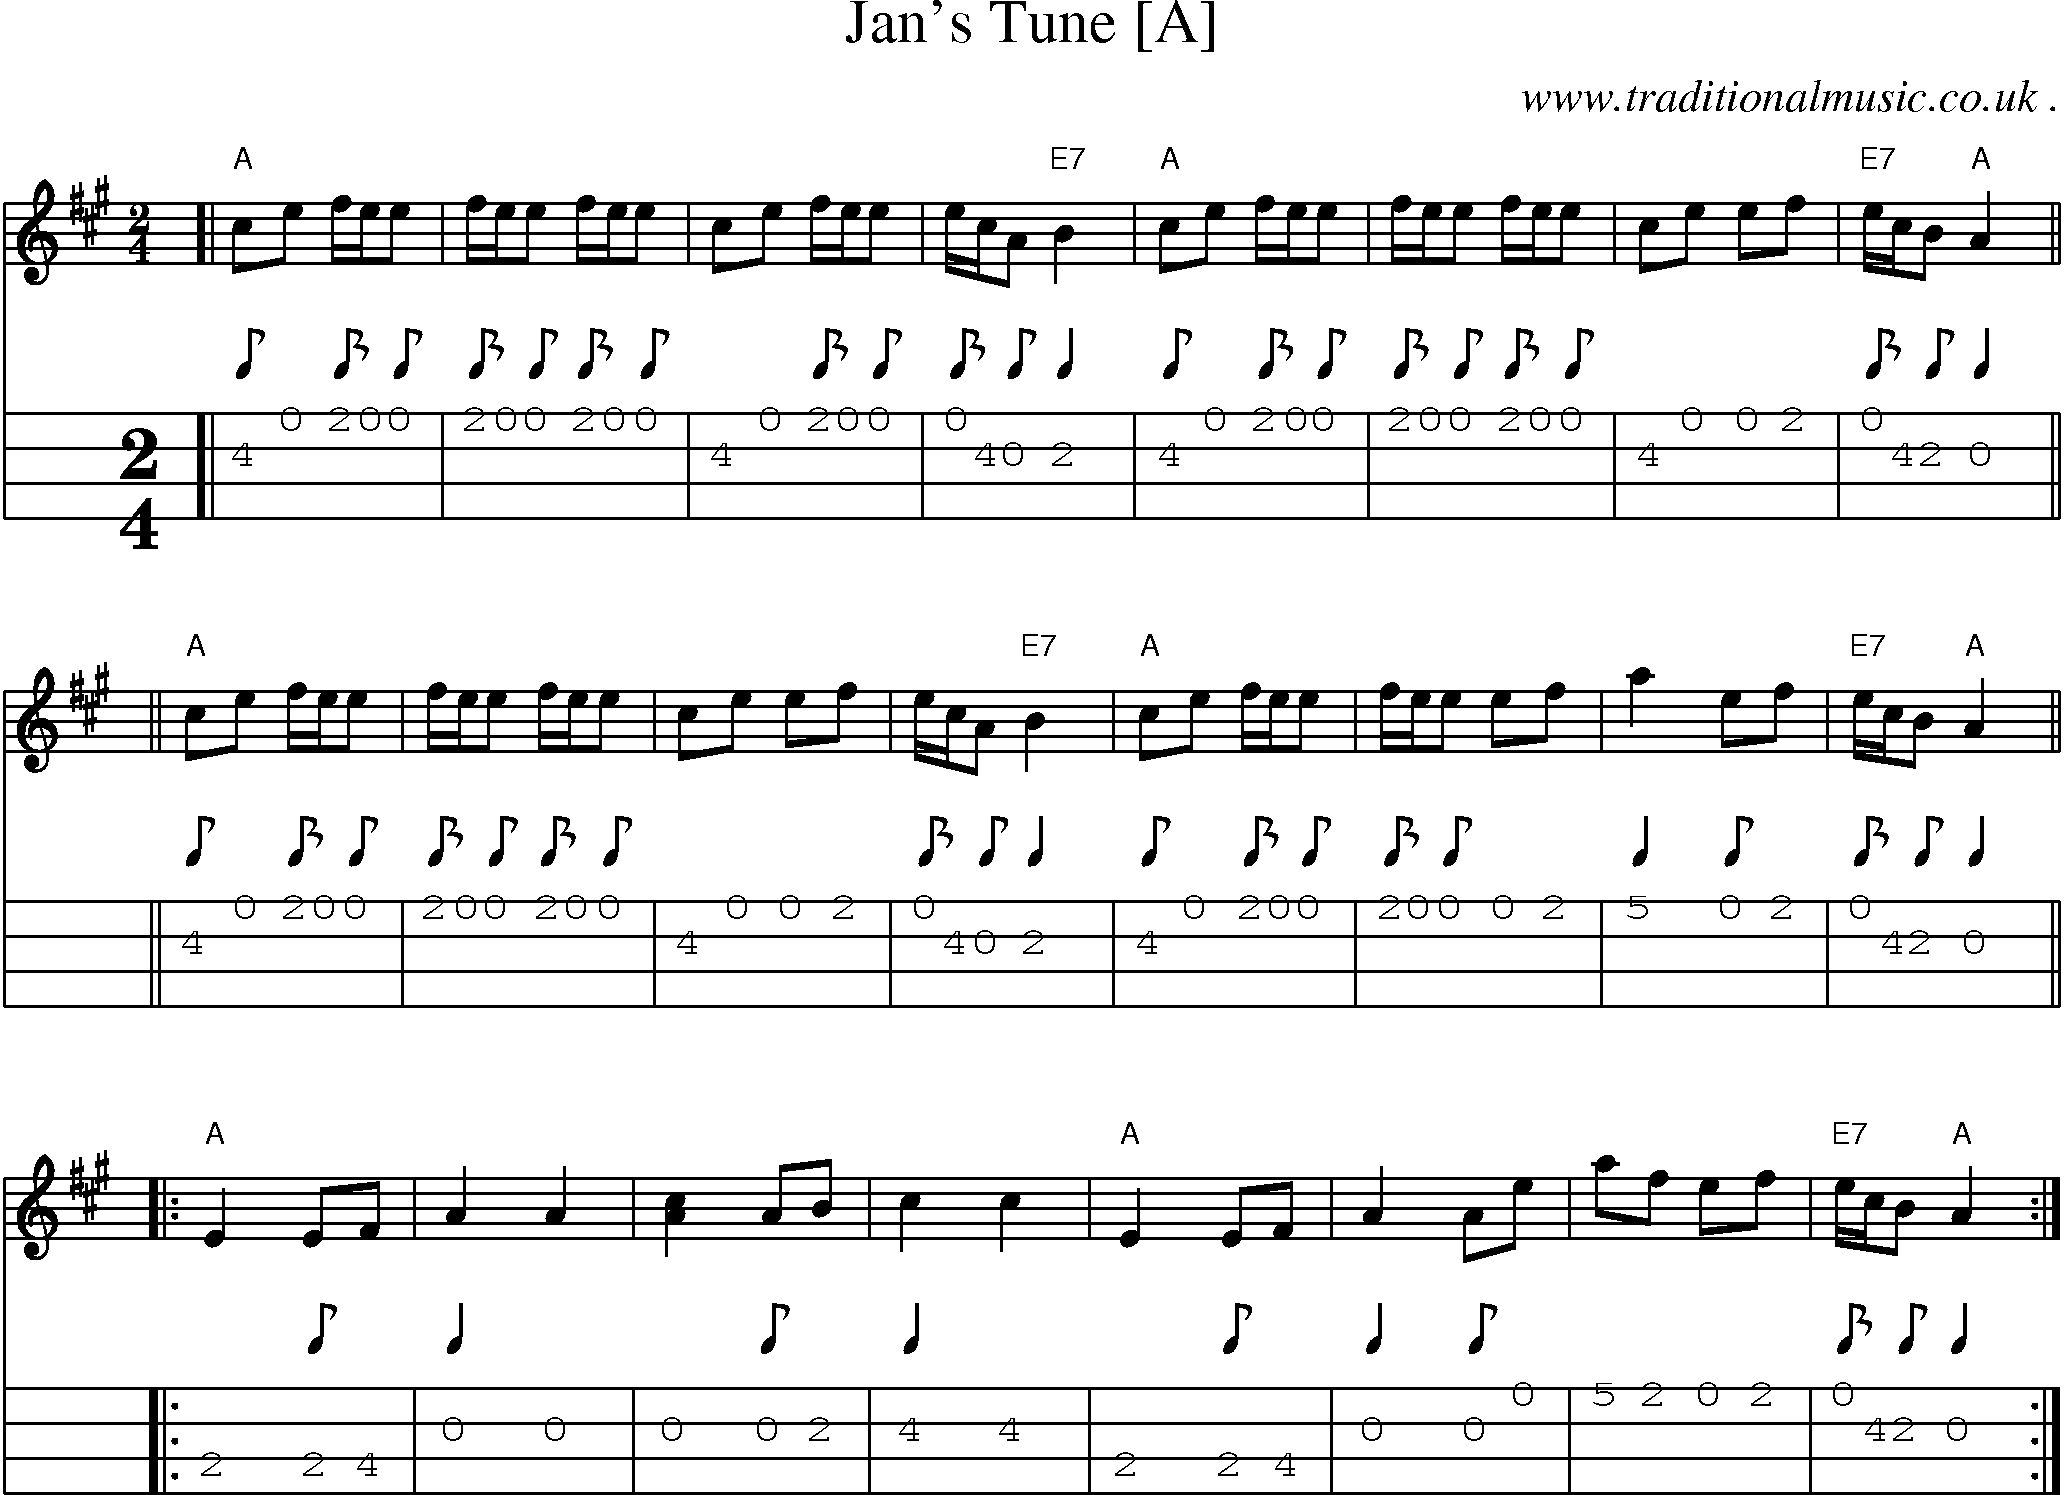 Music Score and Mandolin Tabs for Jans Tune [a]